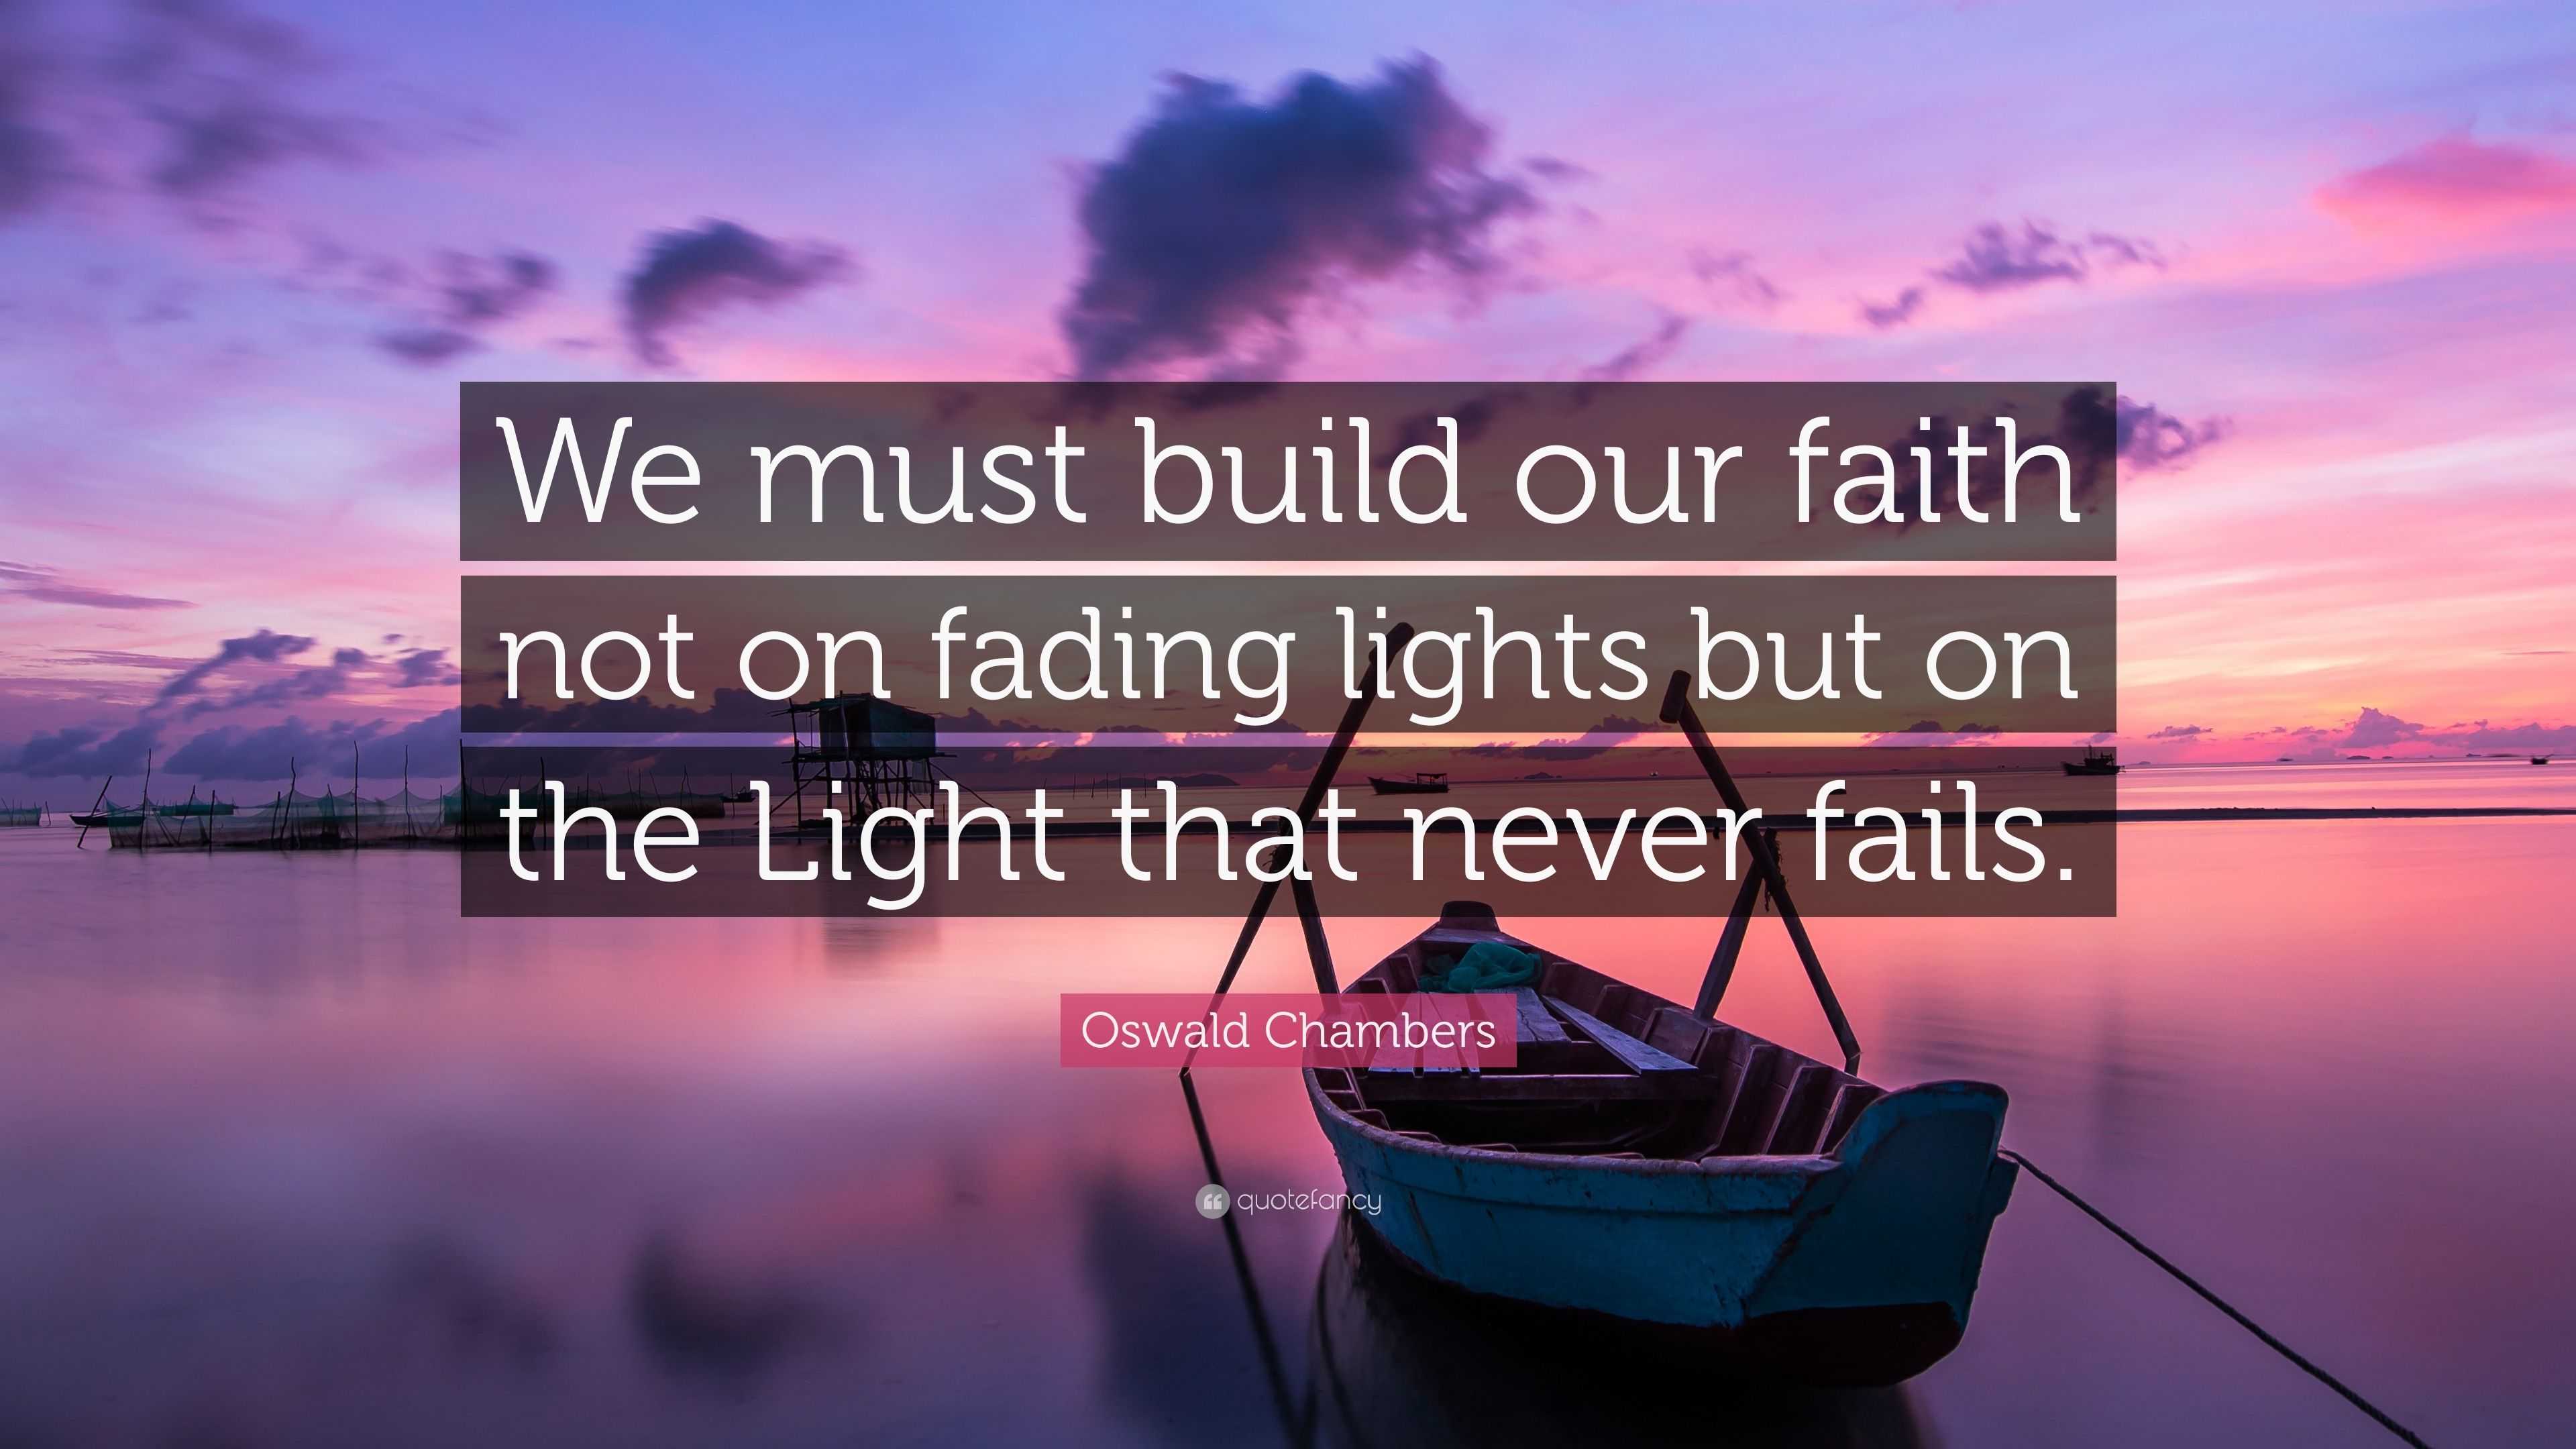 Oswald Chambers Quote: “We must build our faith not on lights but on the Light